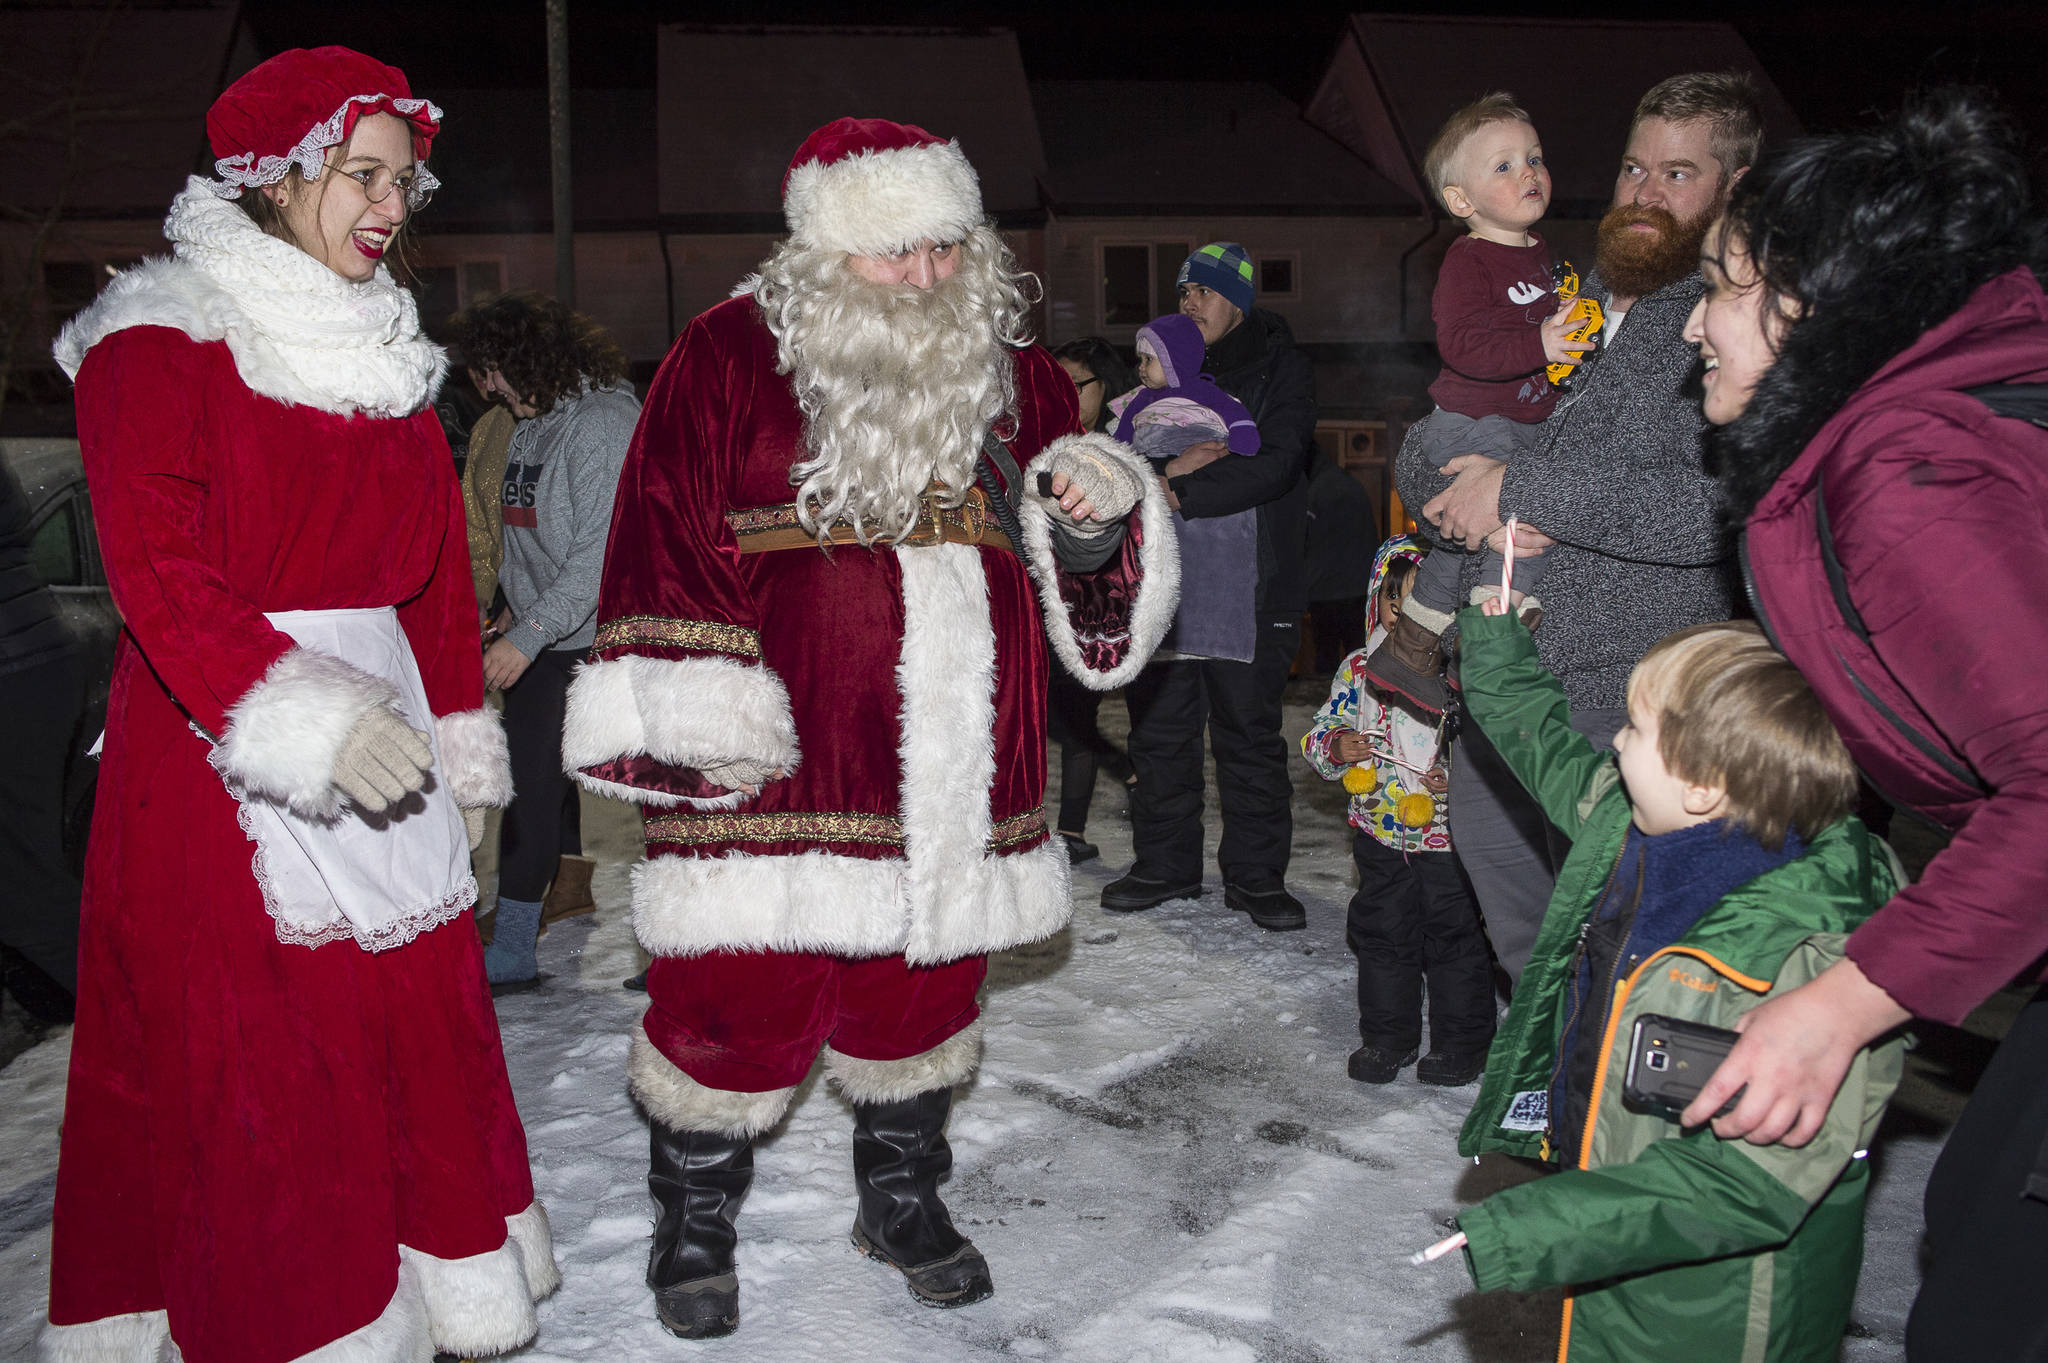 Mr. and Mrs. Claus stop to visit families at Cedar Park during the annual Capital City Fire/Rescue Santa Parade on Friday, Dec. 14, 2018. (Michael Penn | Juneau Empire)